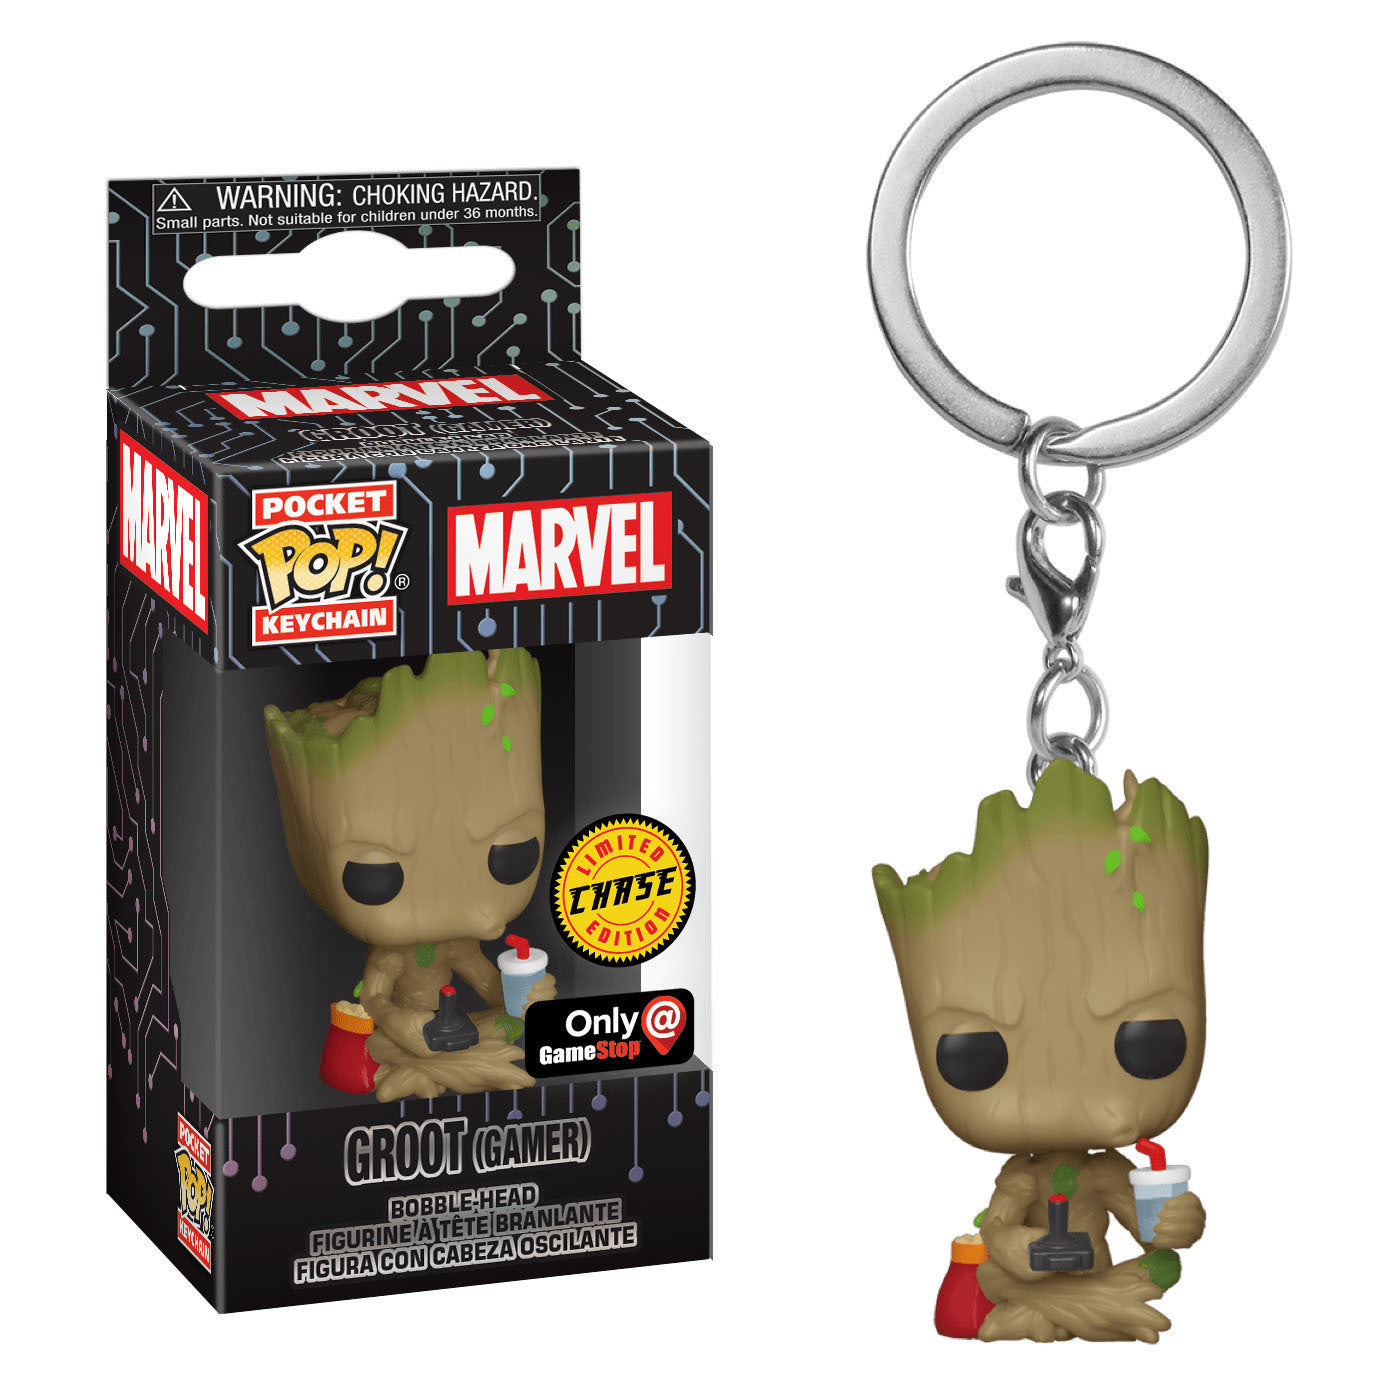 Funko Pocket POP Keychain Marvel Groot (Gamer) CHASE Exclusive